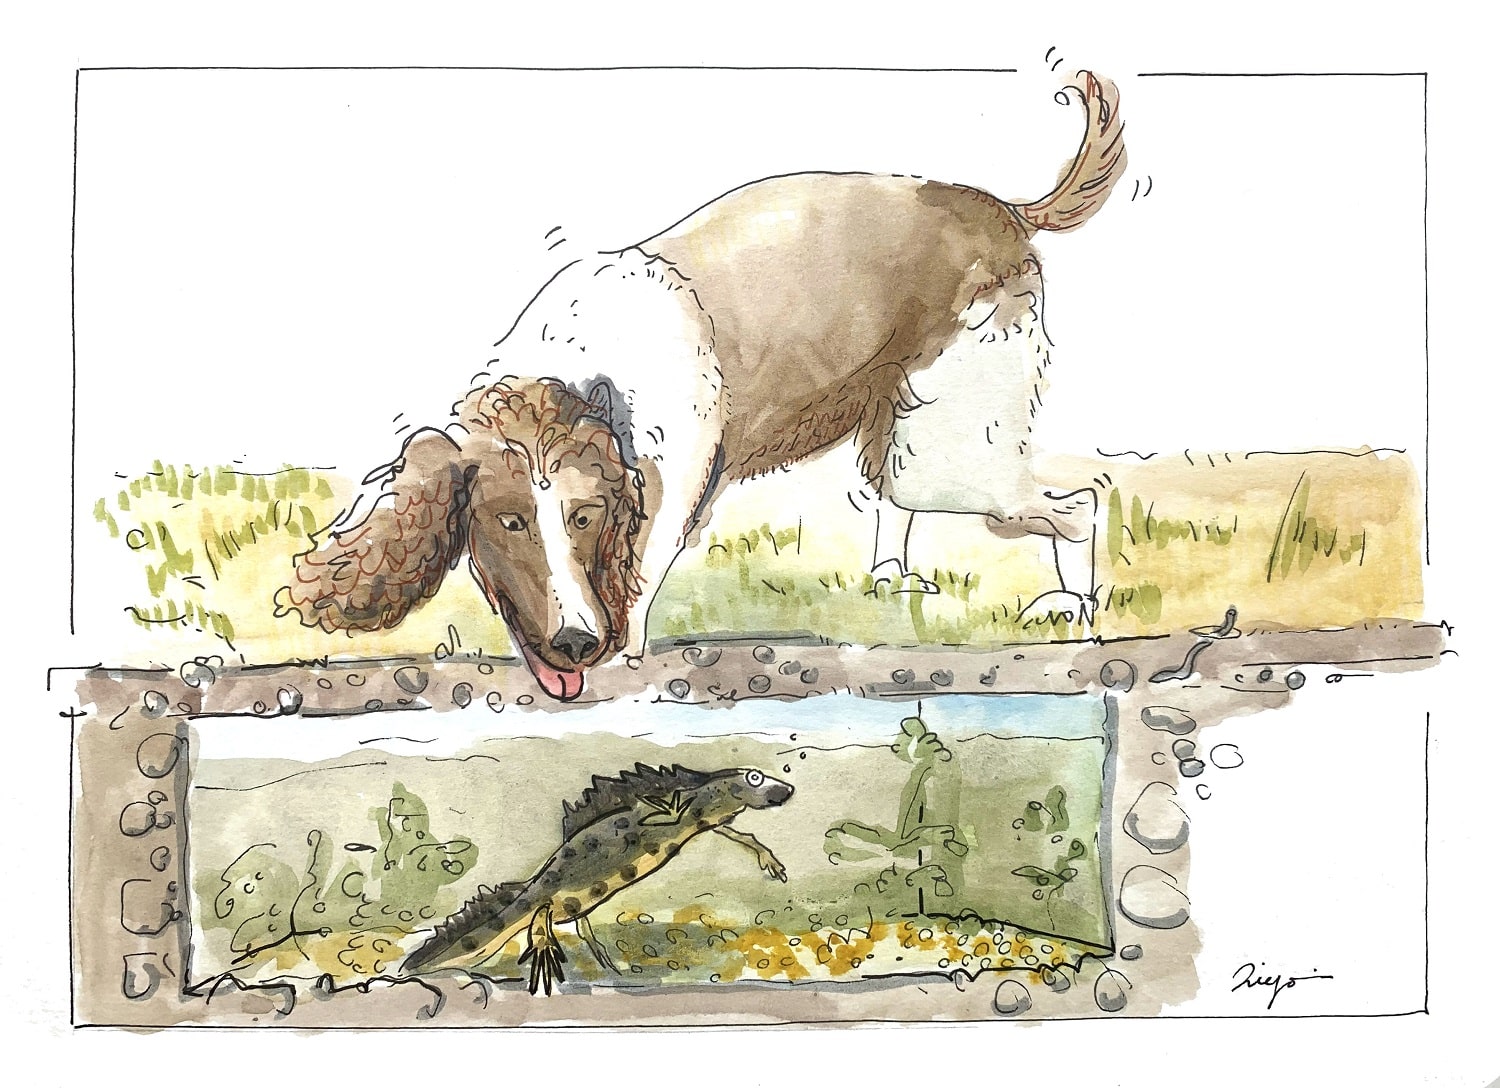 Dogs can find great crested newts in challenging environments